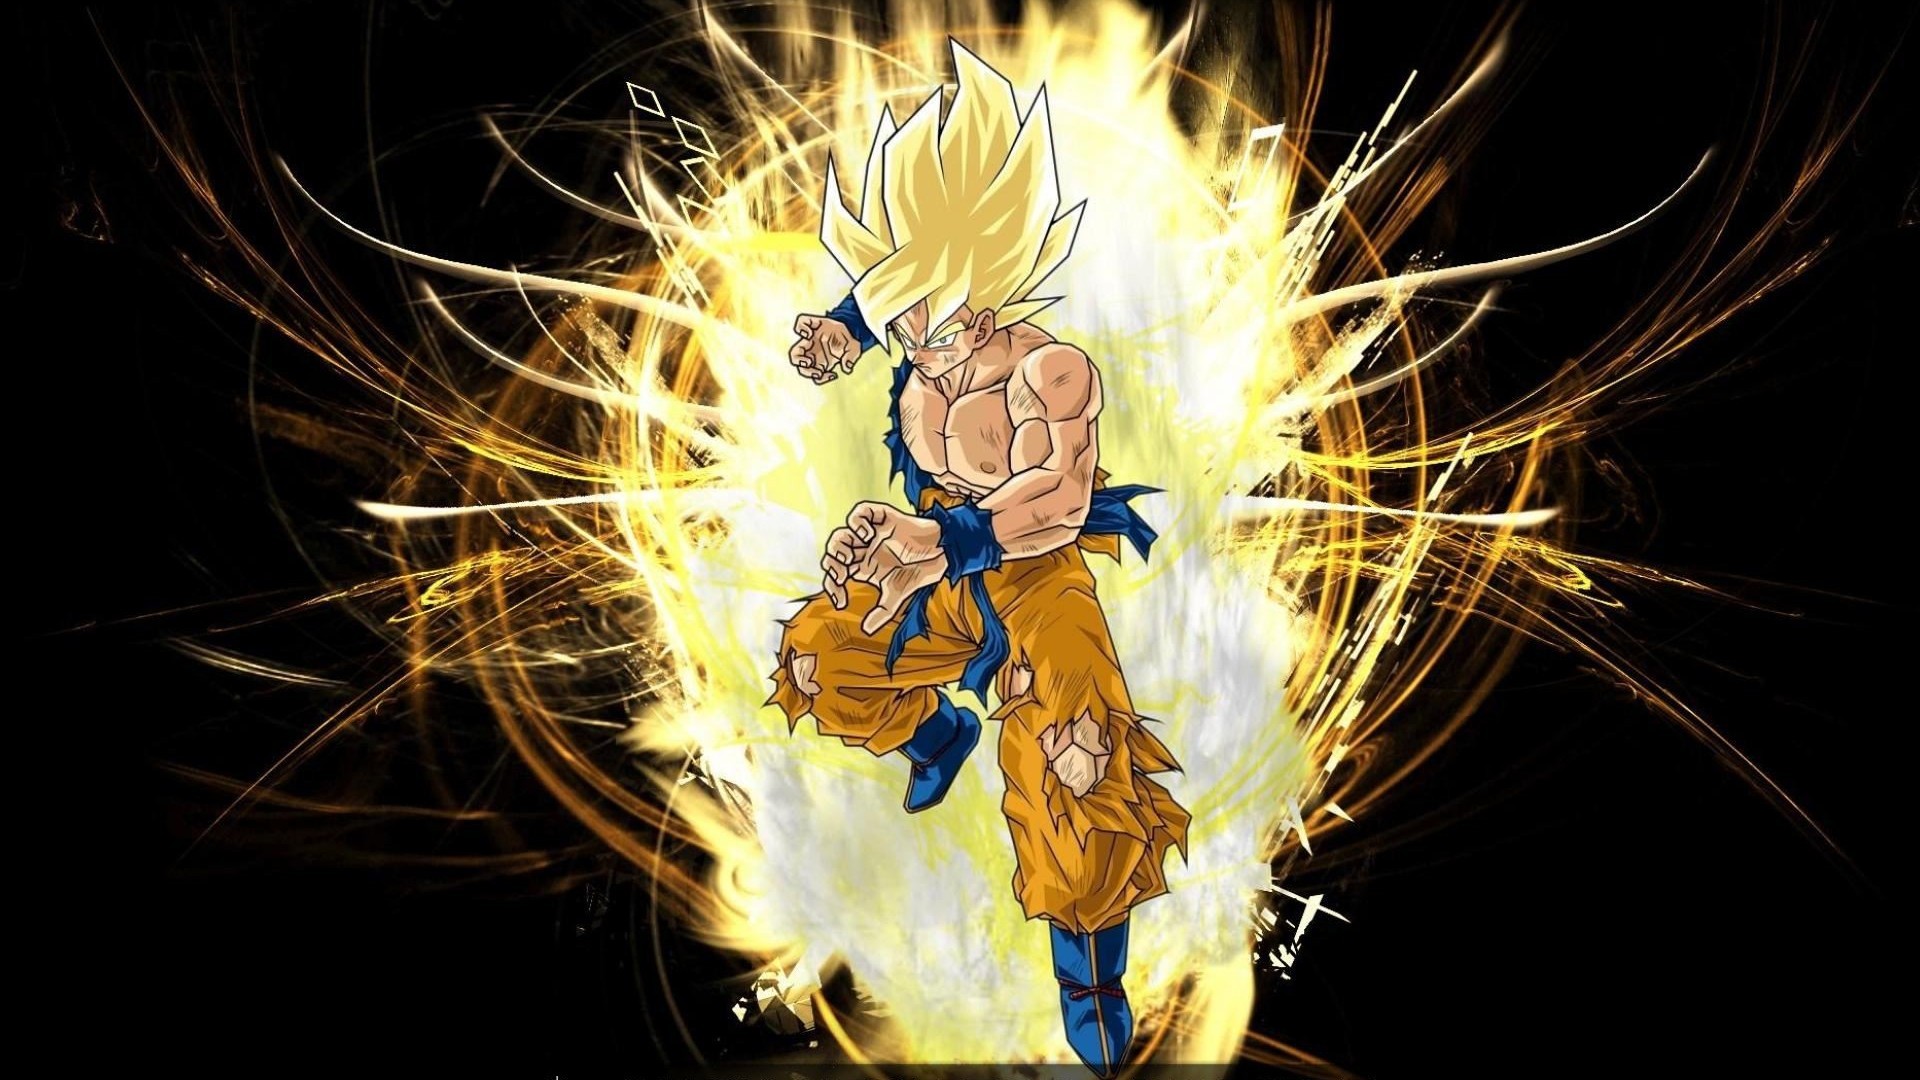 Wallpaper HD Goku Super Saiyan With Resolution 1920X1080 pixel. You can make this wallpaper for your Desktop Computer Backgrounds, Mac Wallpapers, Android Lock screen or iPhone Screensavers